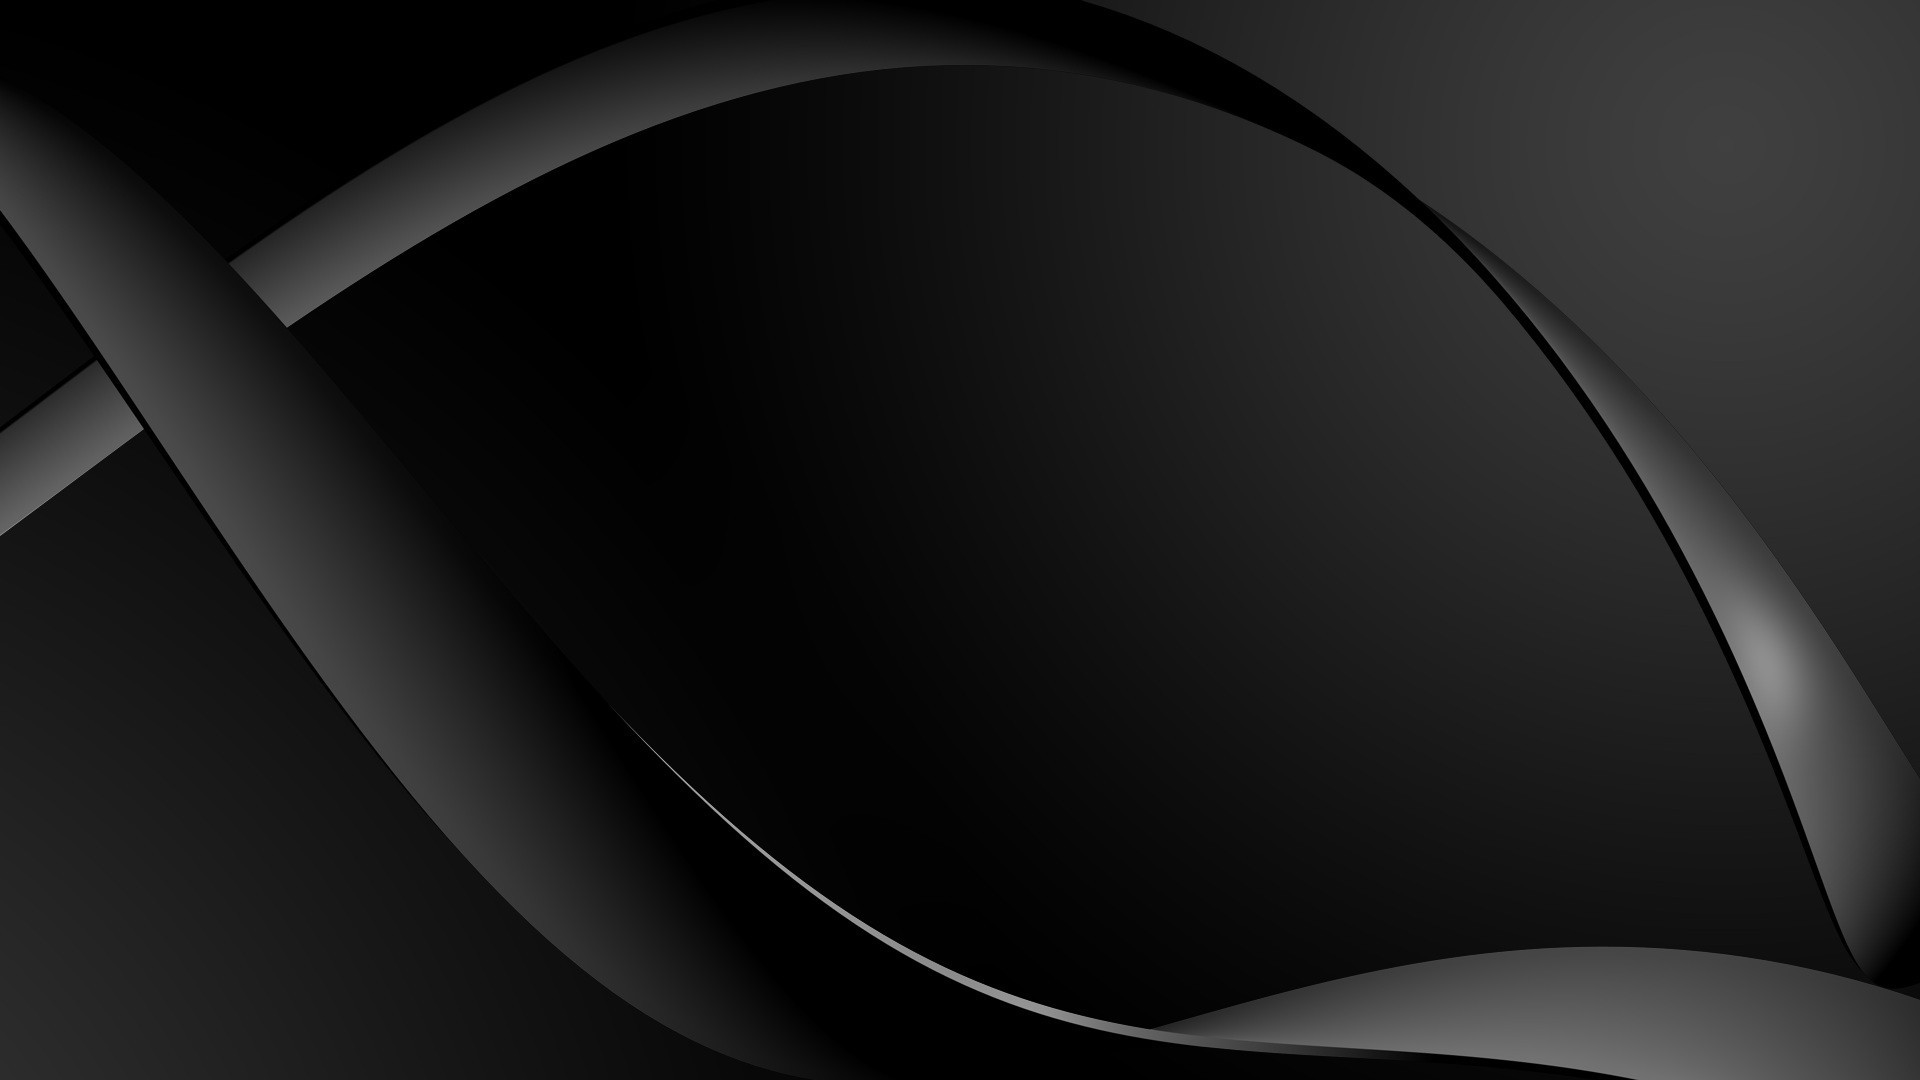 1920x1080 Black and White Wave Wallpaper Luxury Cool Black Background Wallpaper  Wallpapersafari